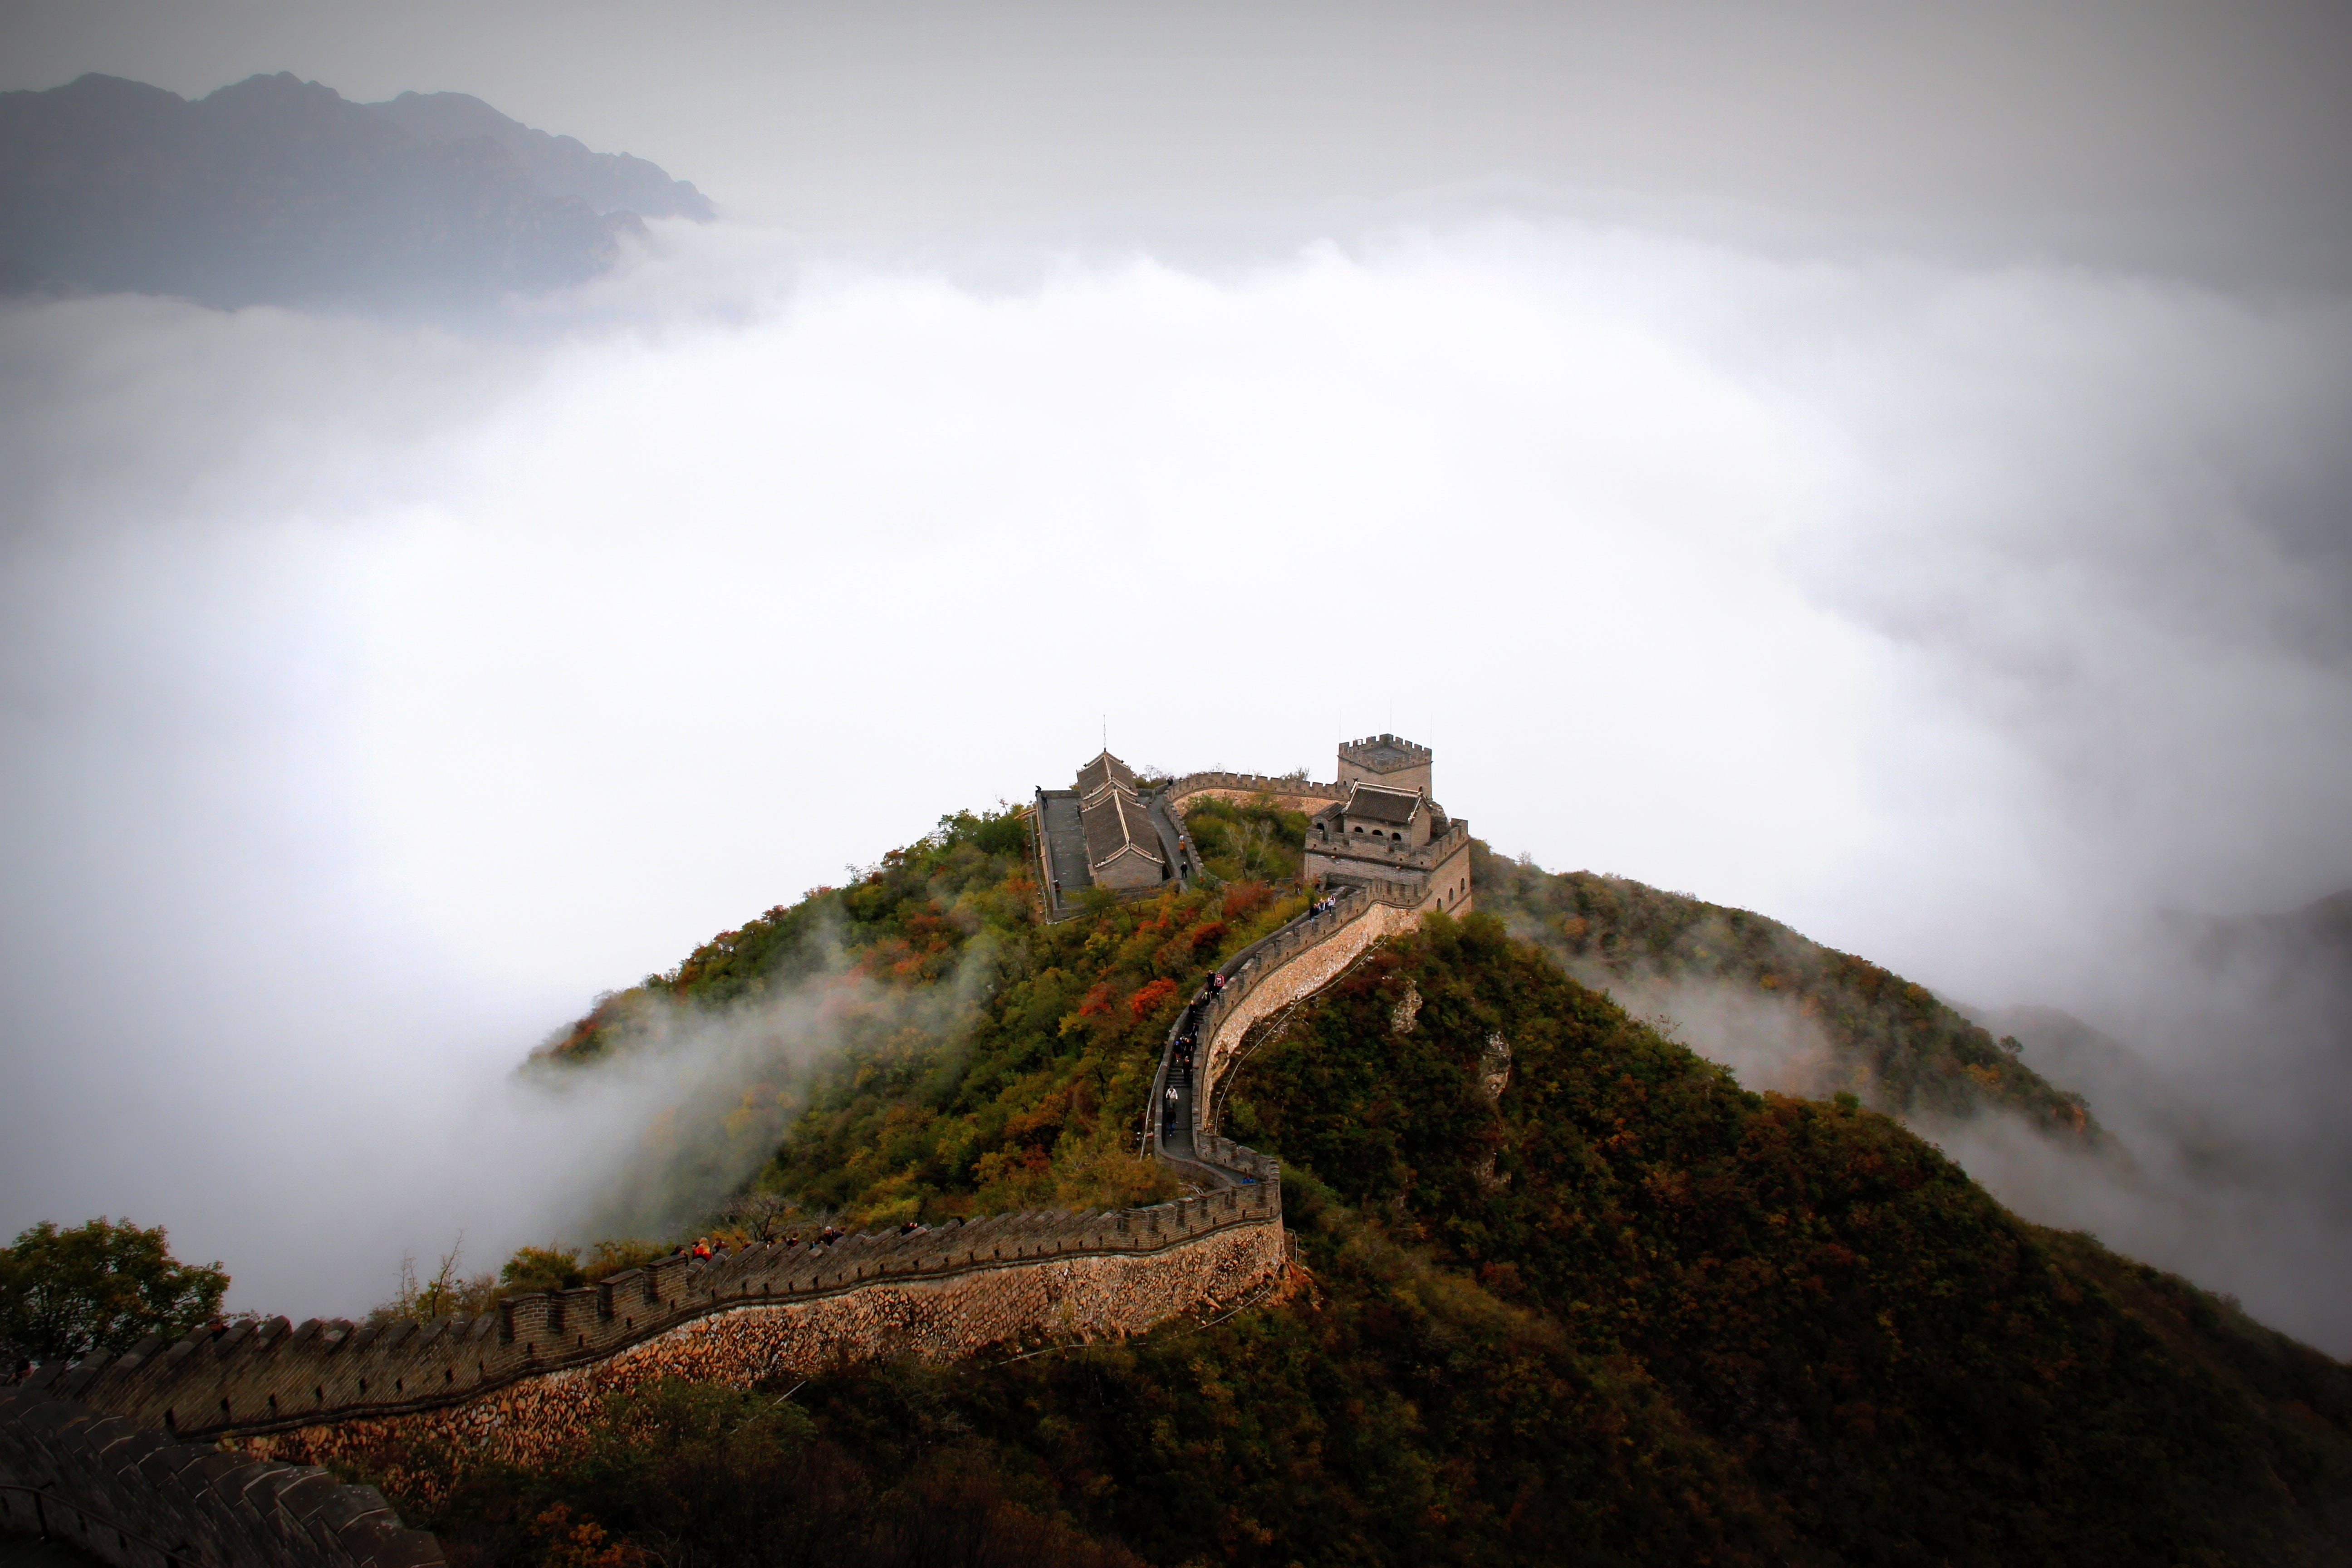 Marvel at the majestic Great Wall of China, an ancient wonder in Asia. Explore history with DREW TRAVEL.